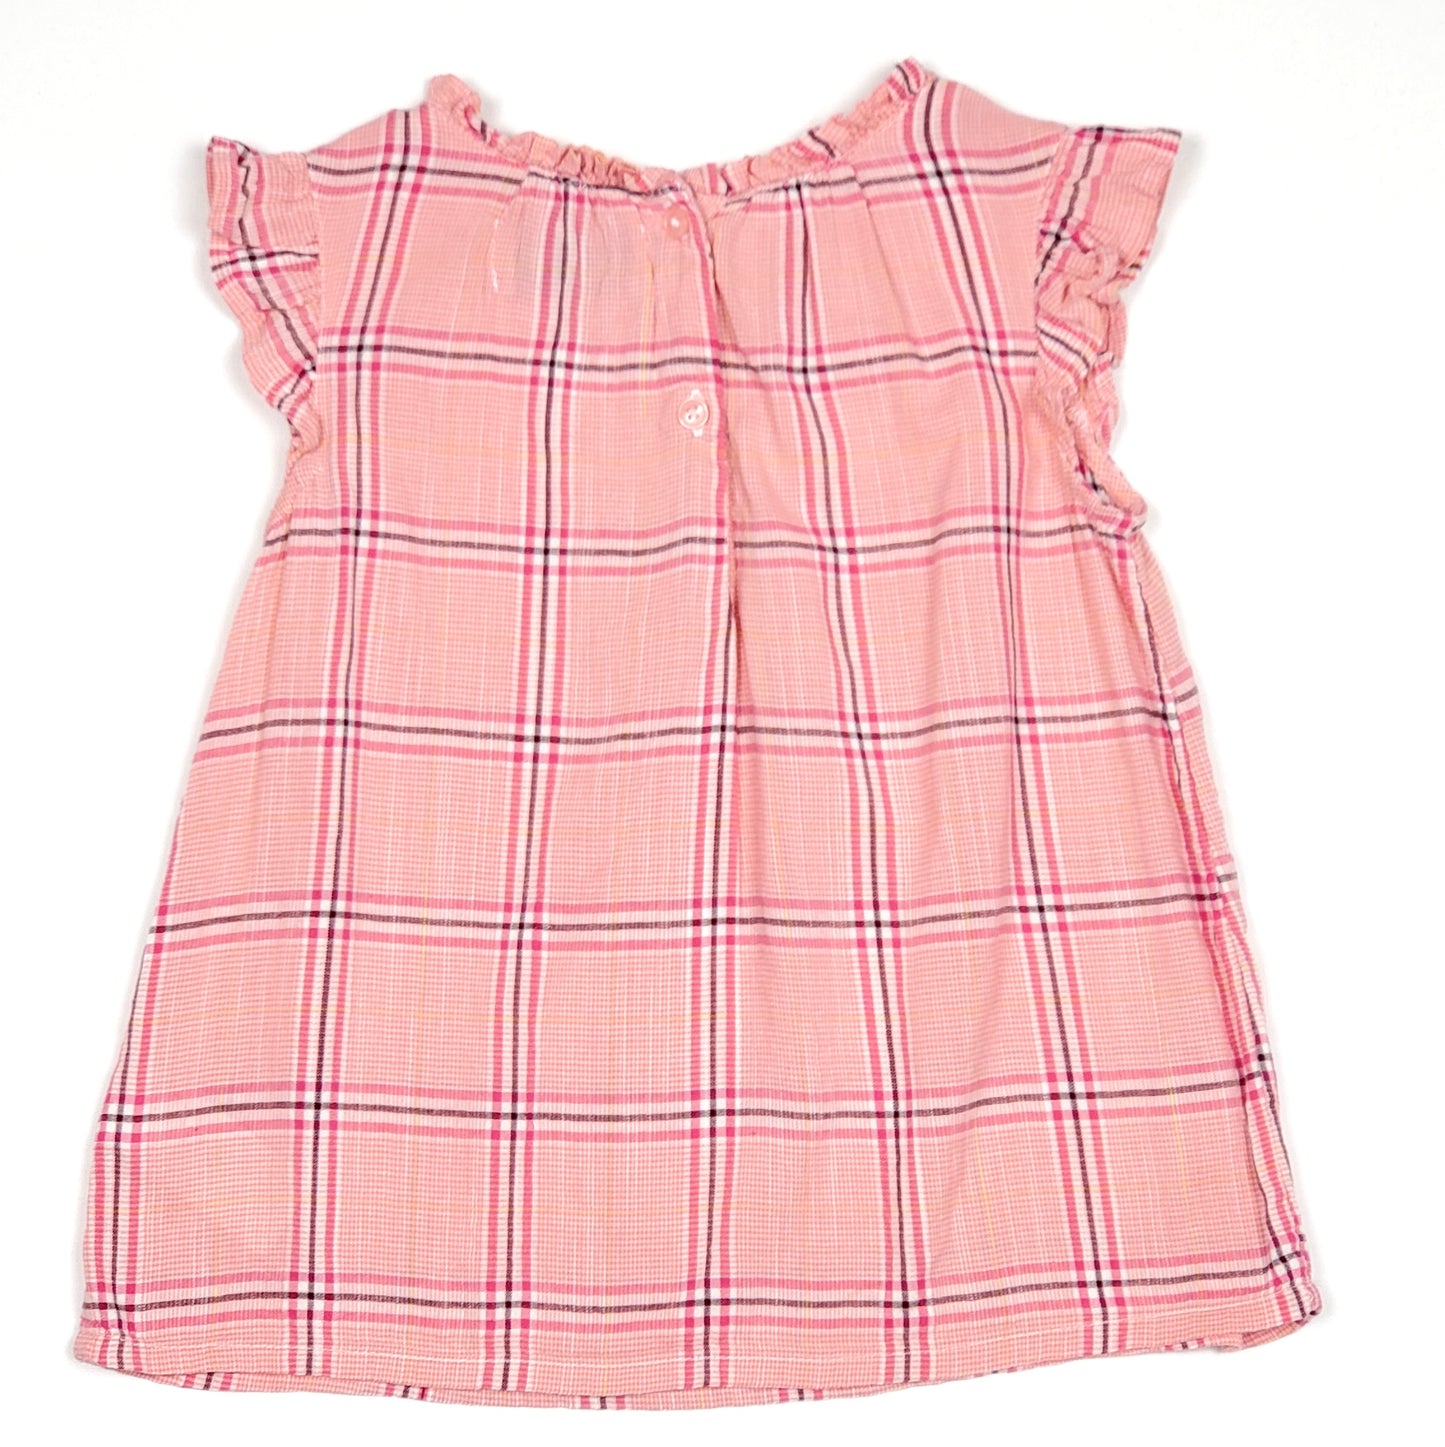 Old Navy Girls Pink Plaid Top 5T Used View 2